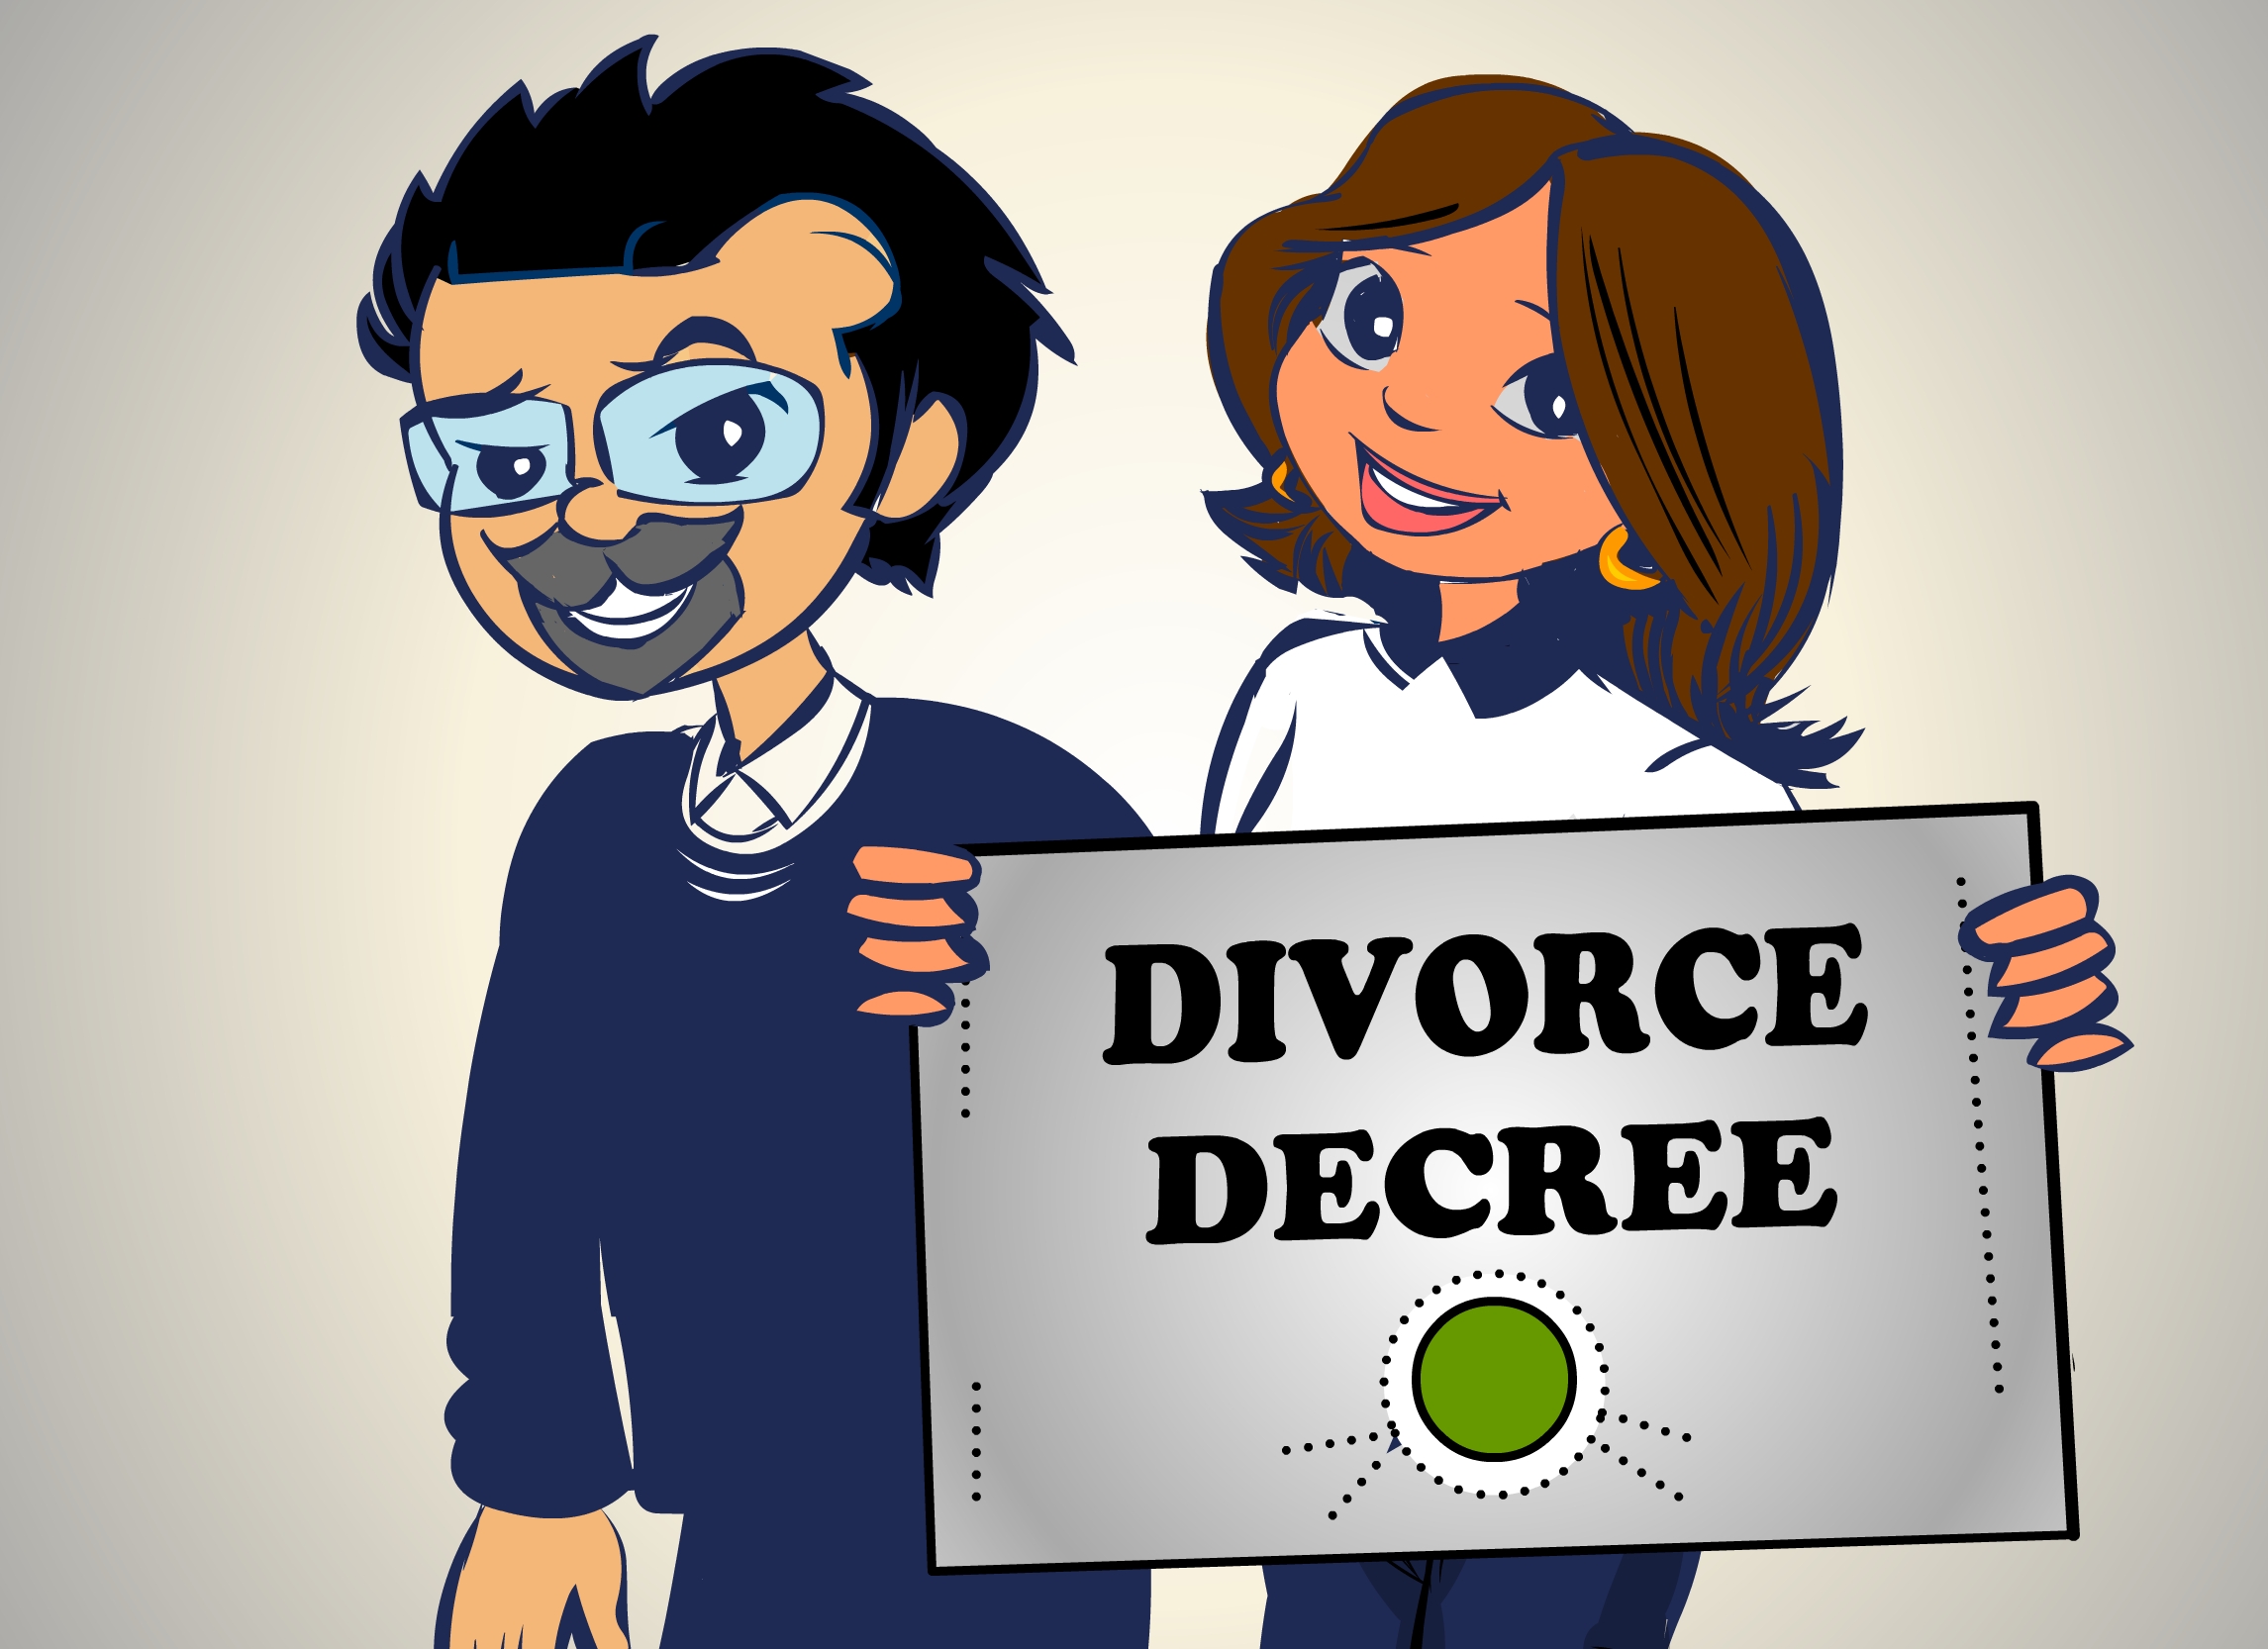 Community Property in a divorce 1